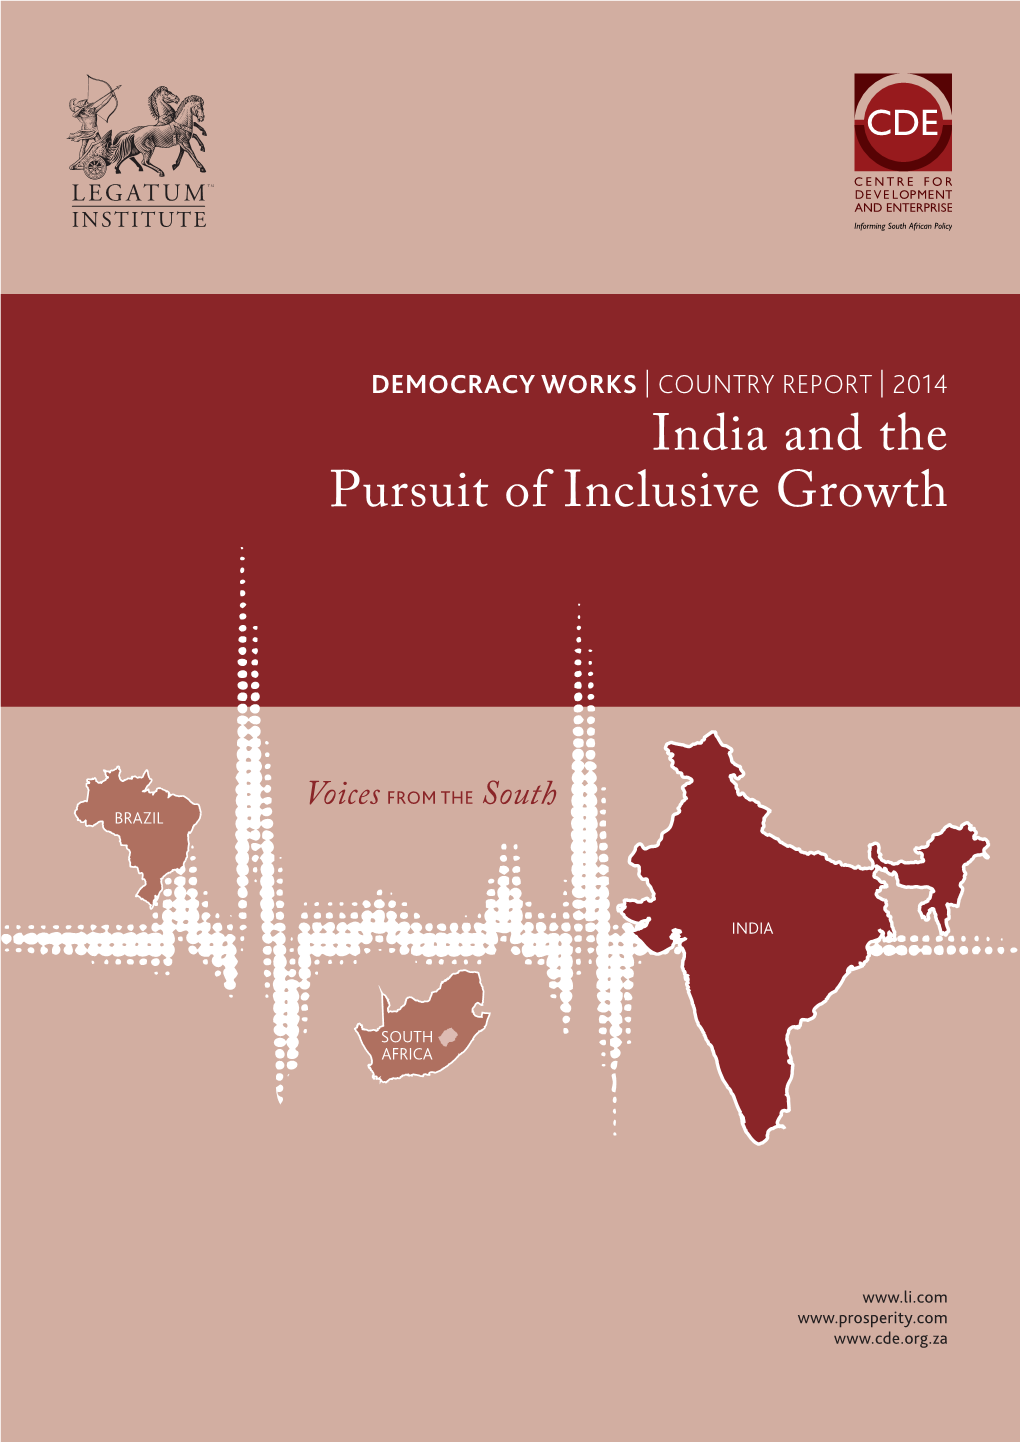 India and the Pursuit of Inclusive Growth